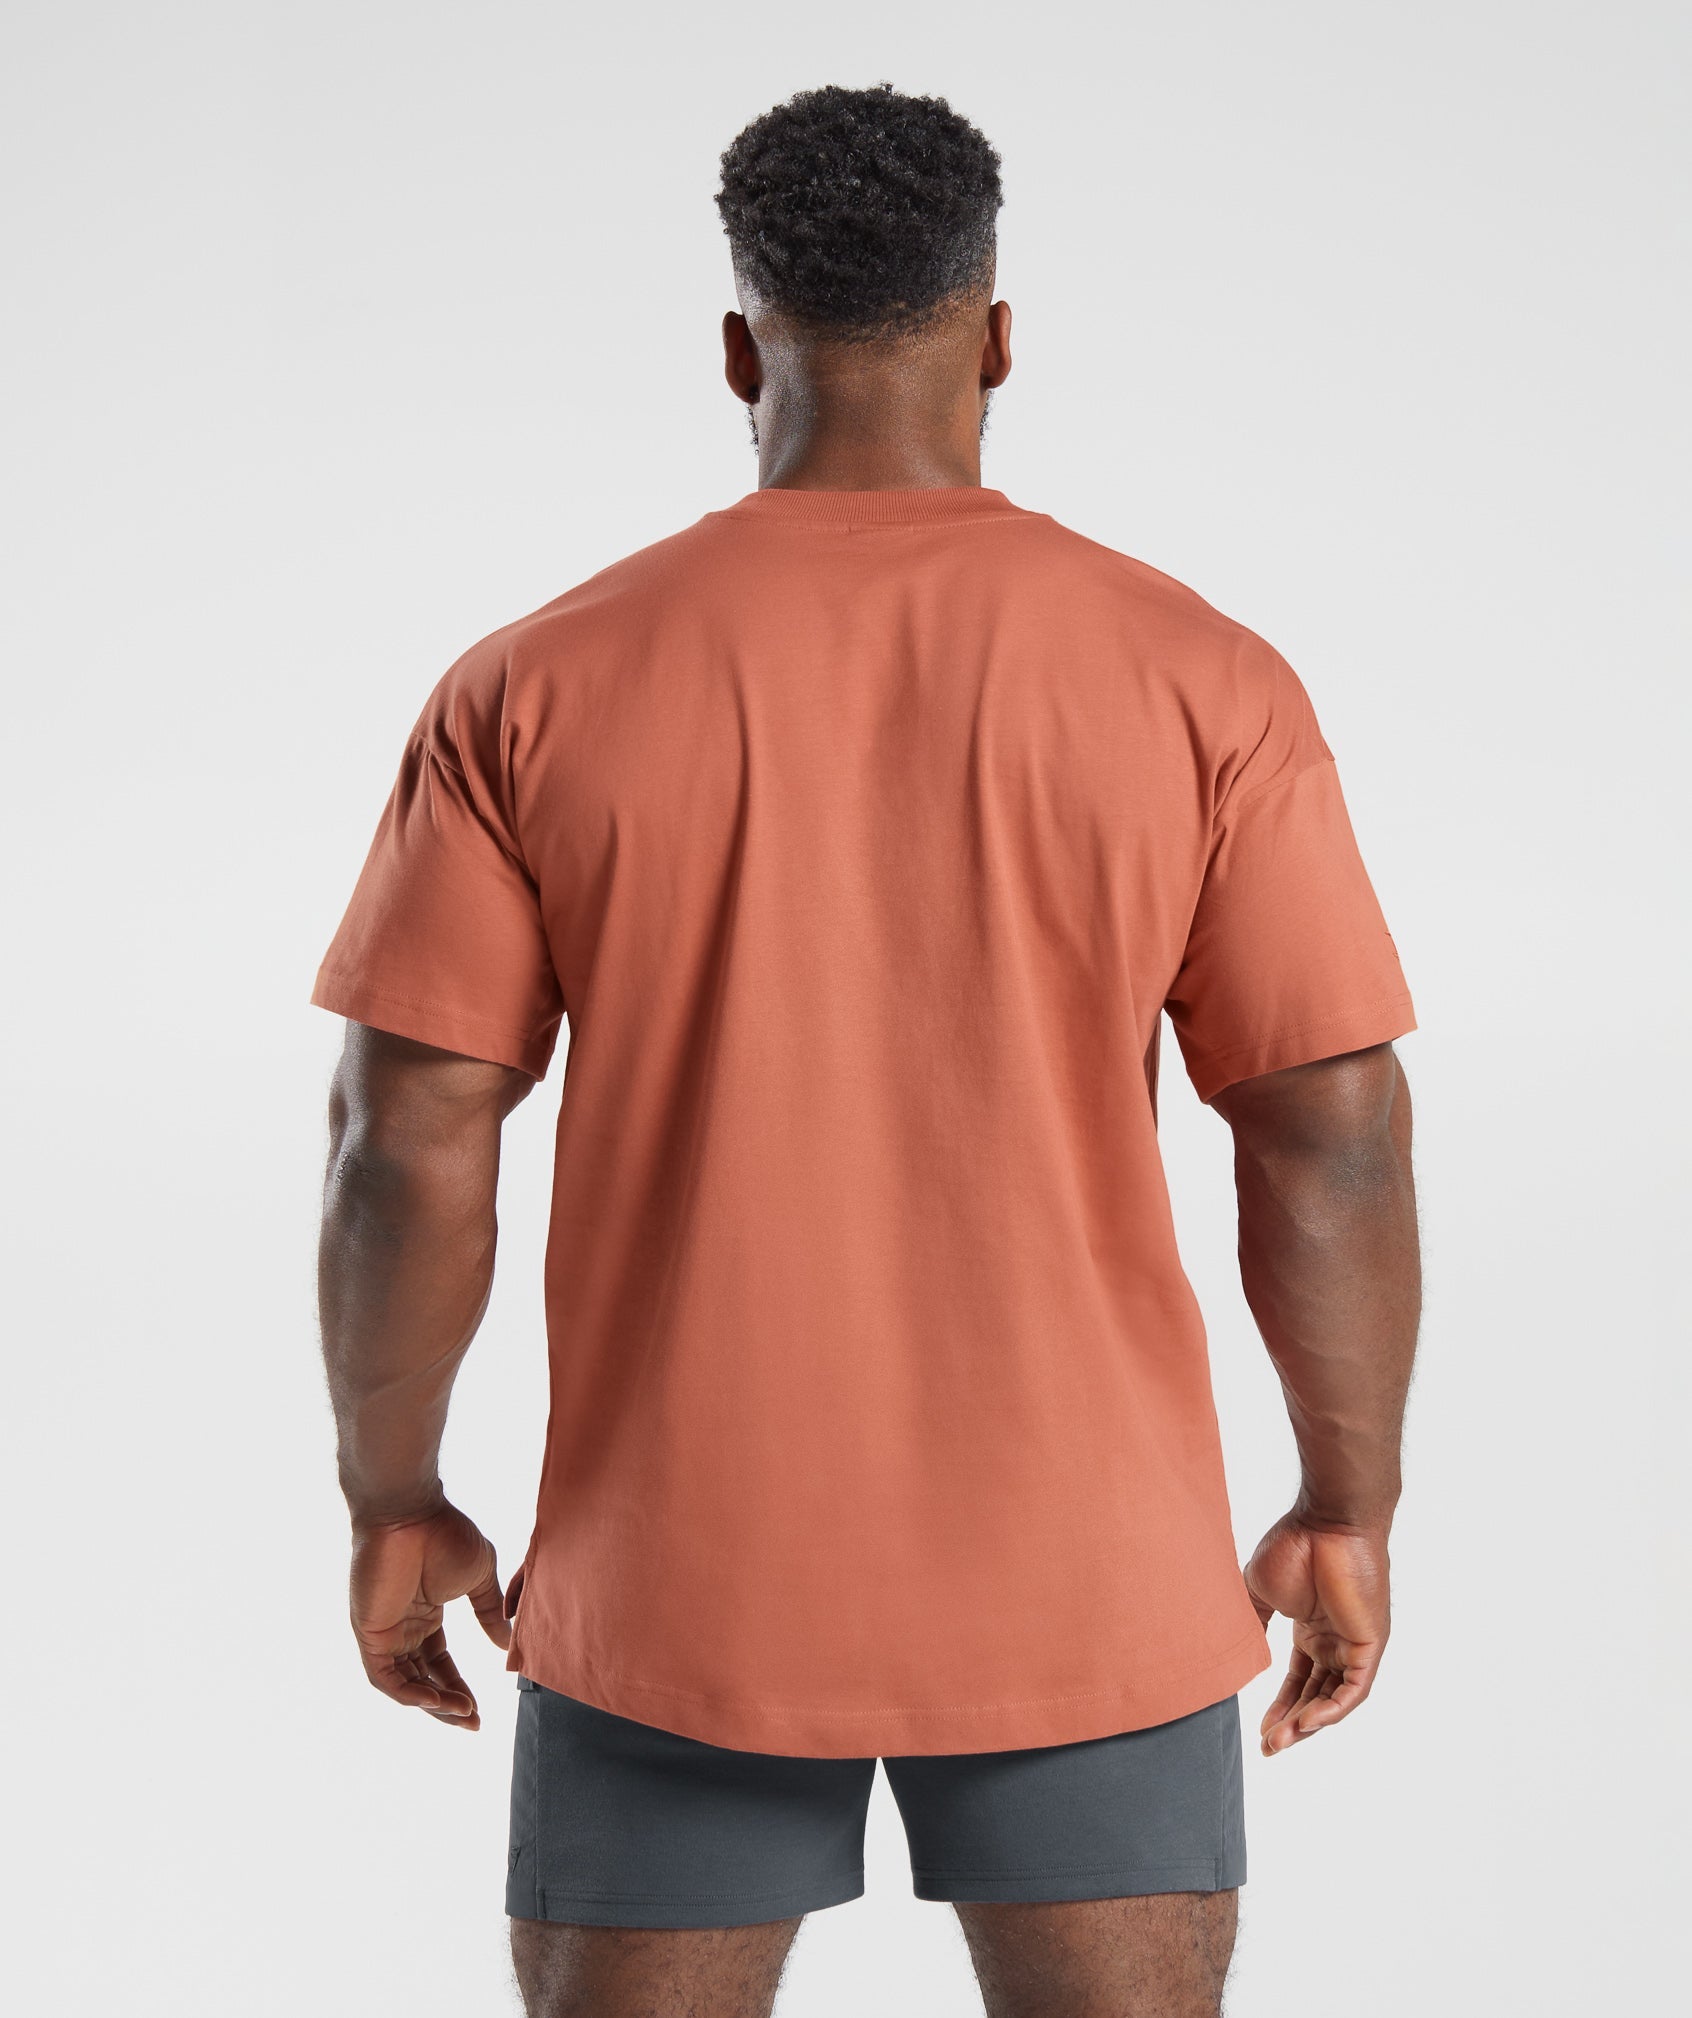 Rest Day Essentials T-Shirt in Persimmon Red - view 2